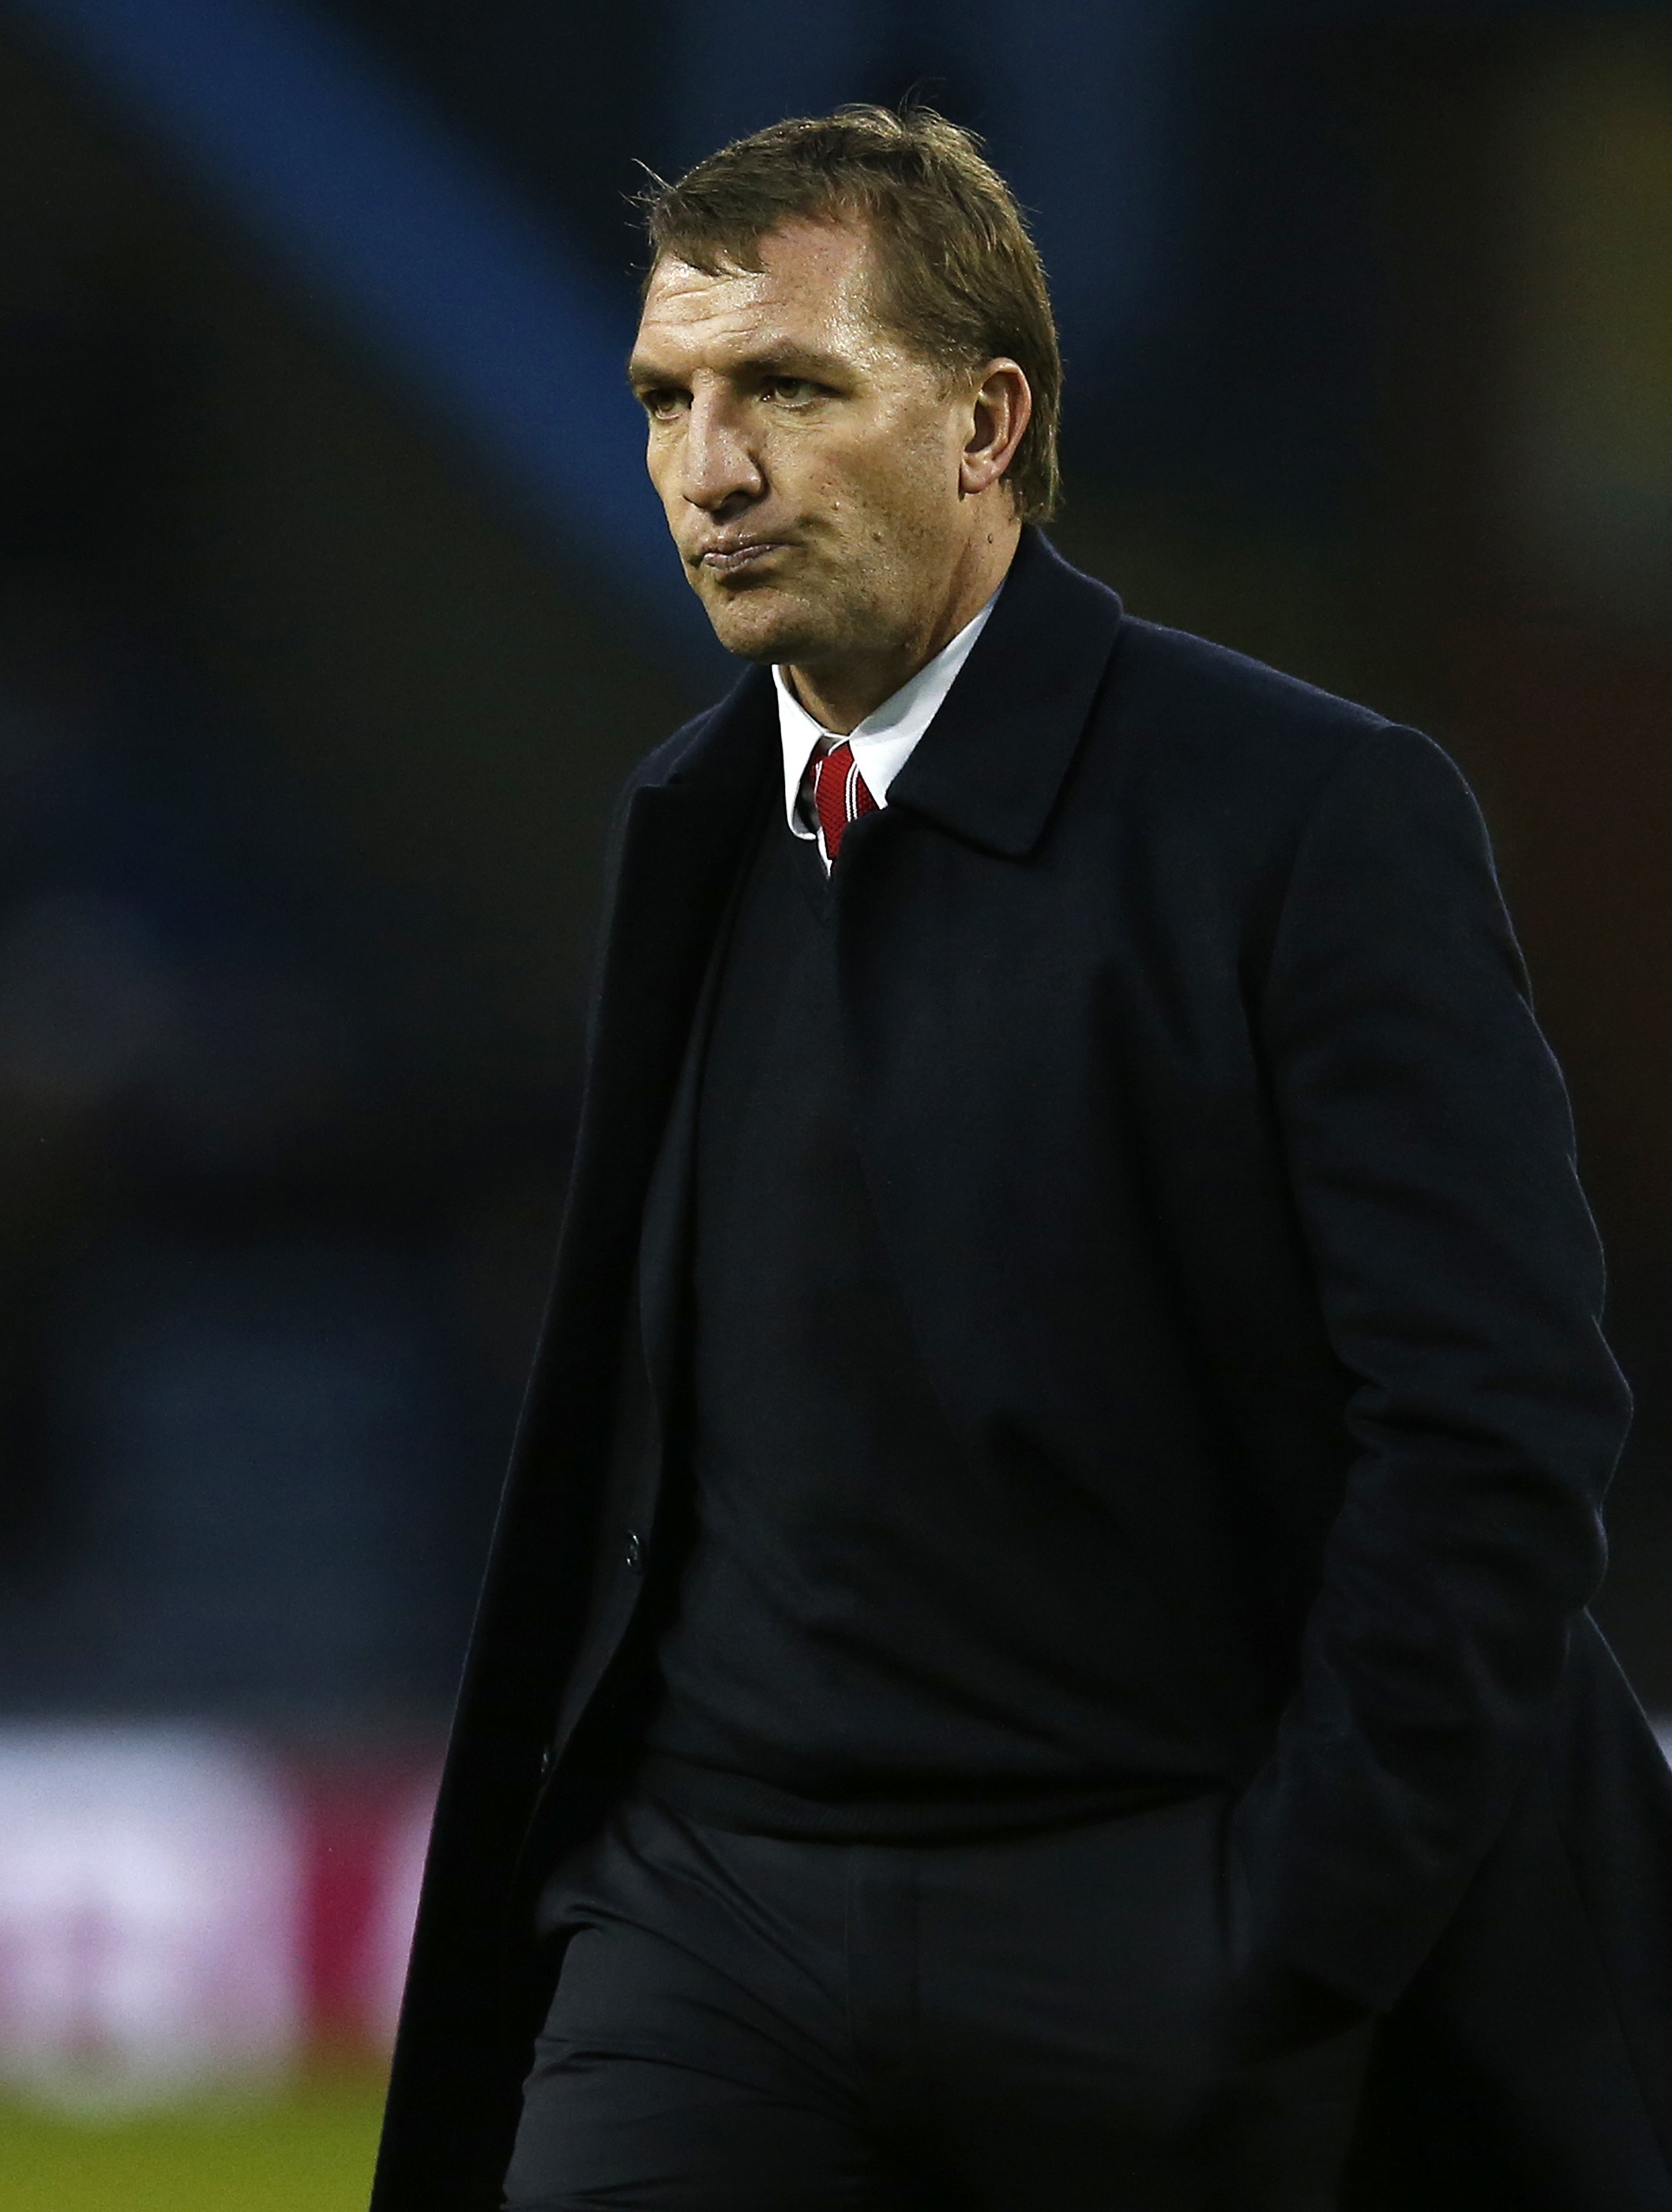 Liverpool manager Brendan Rodgers leaves the pitch at half time during their English Premier League soccer match against Burnley at Turf Moor in Burnley